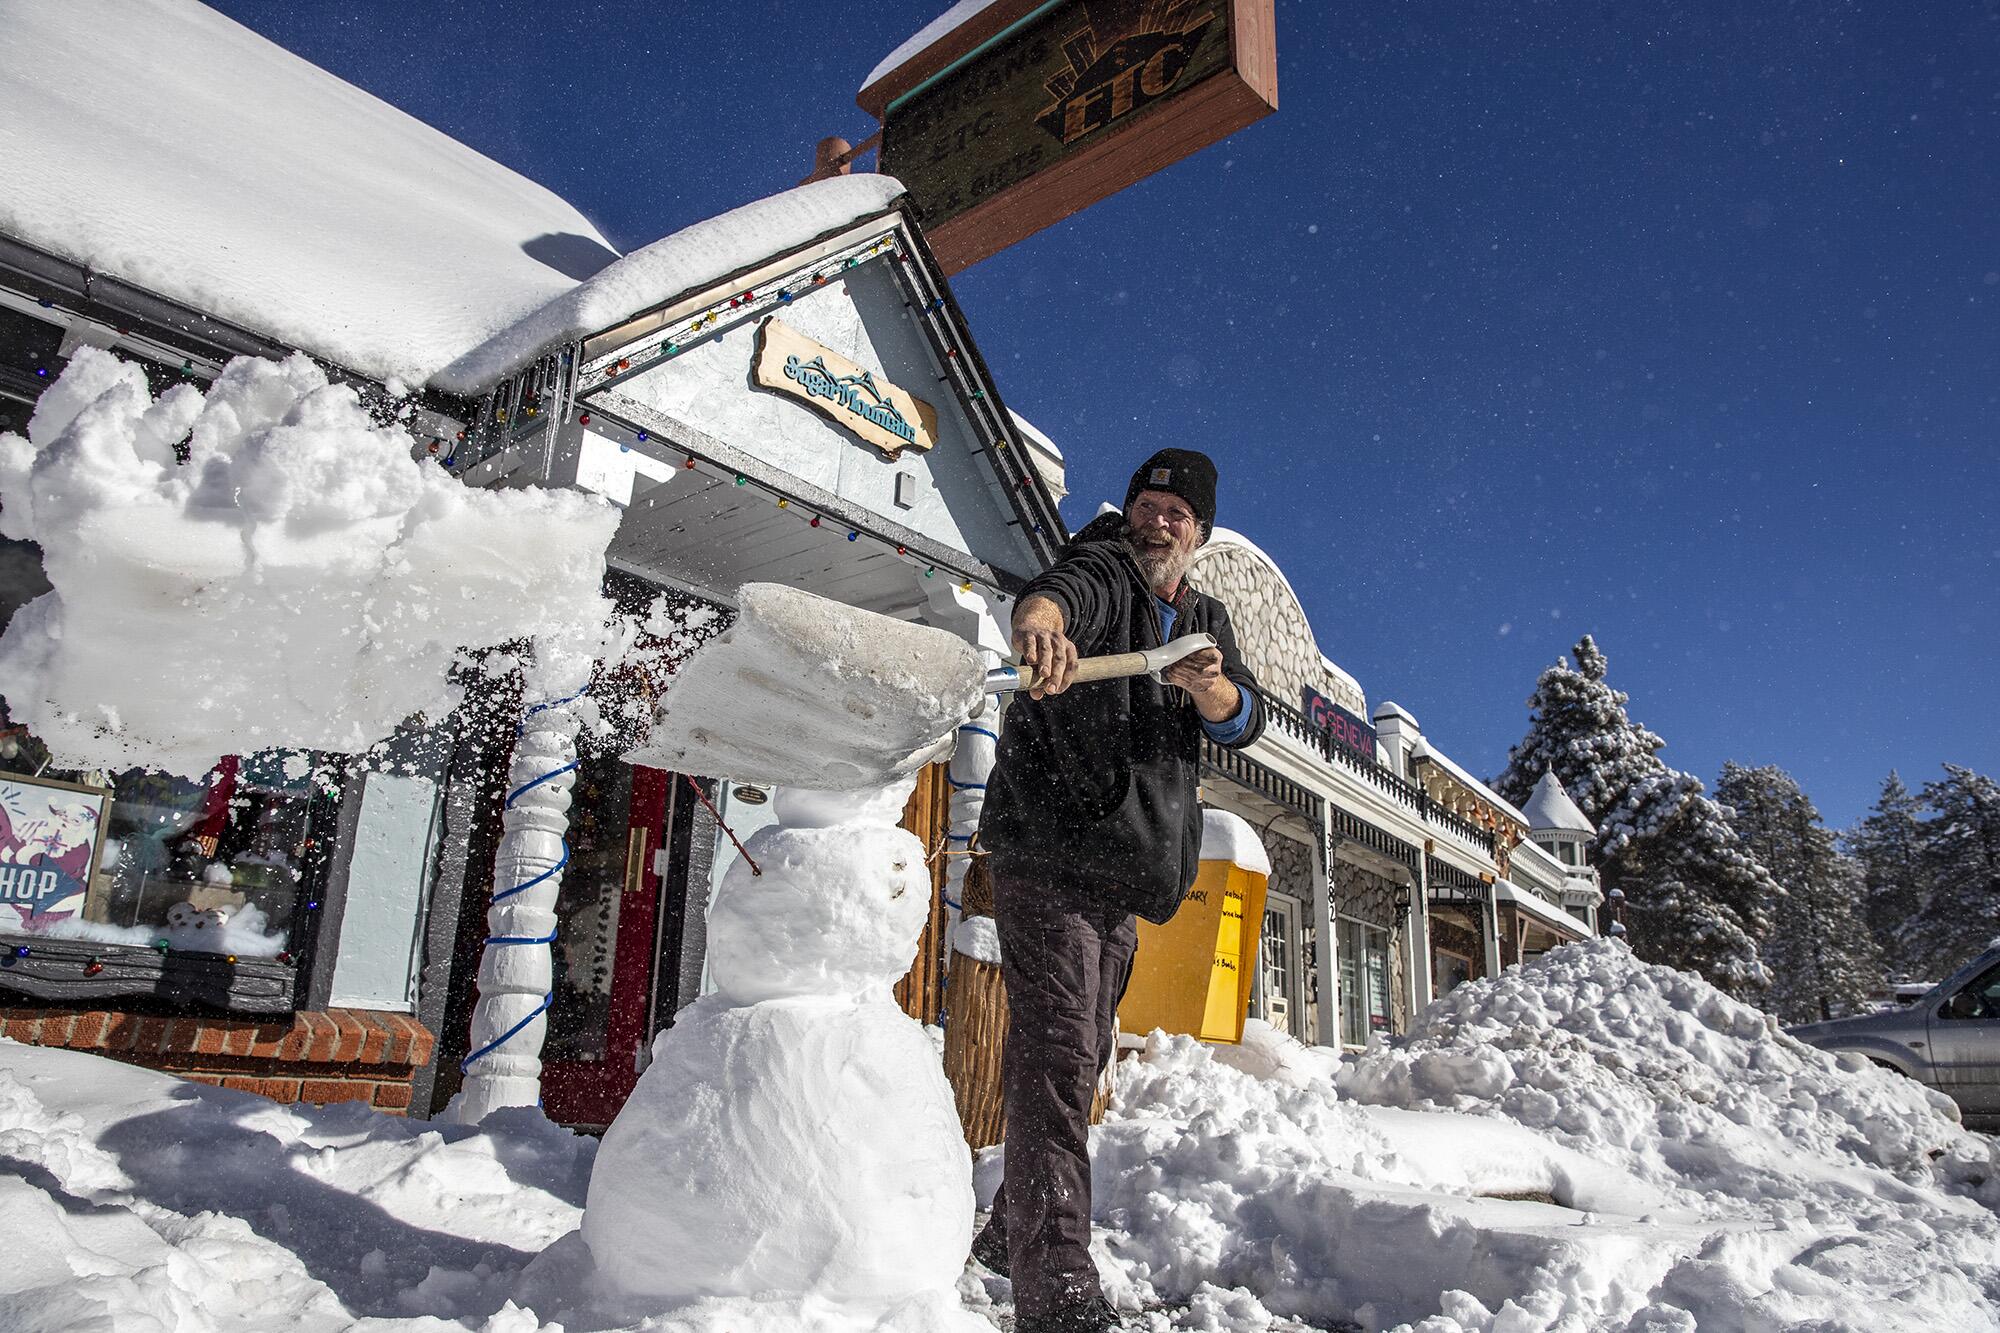 Store owner Adam Hurlbut shovels snow next to a snowman in front of Sugar Mountain gift store.